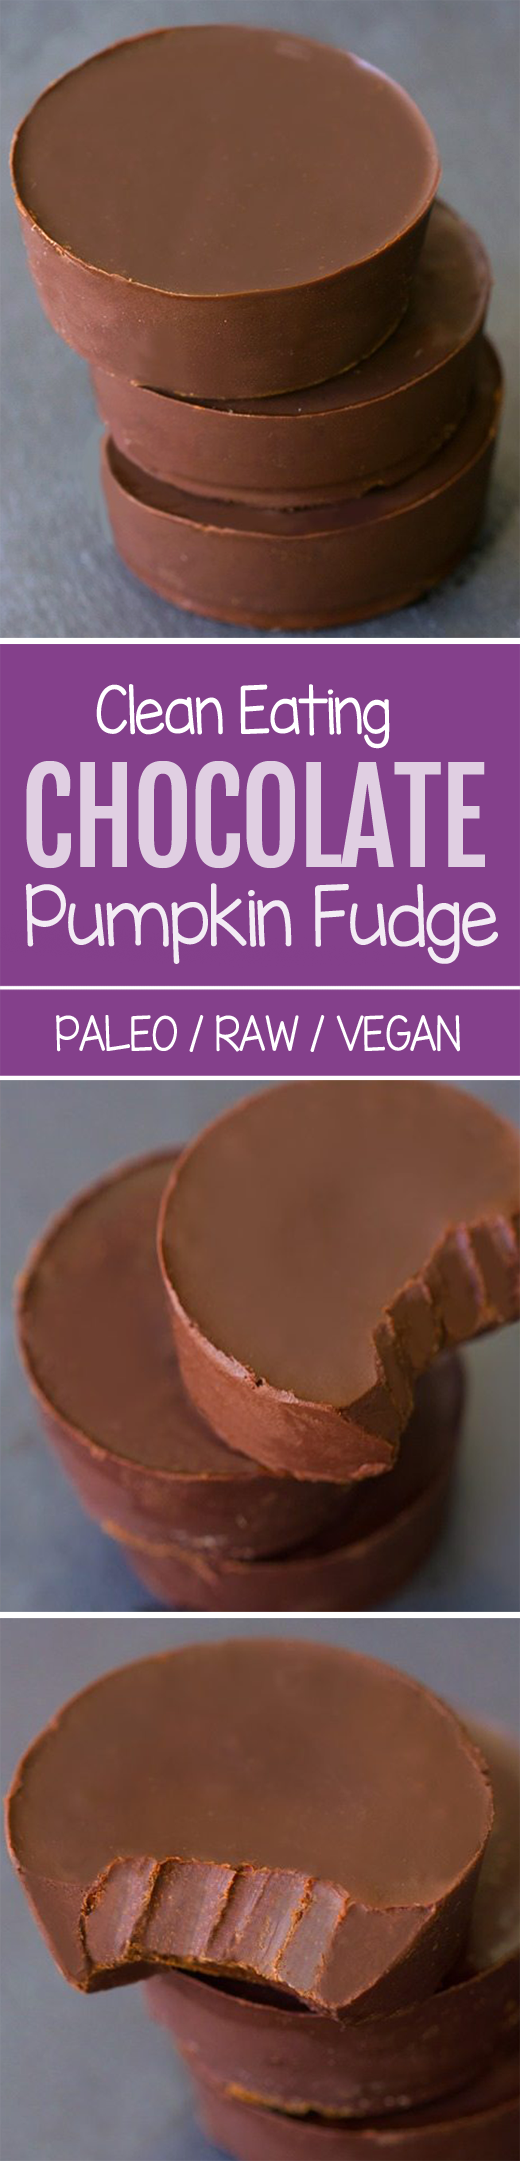 Clean Eating Chocolate Pumpkin Fudge – from @choccoveredkt… 1/2 cup canned pumpkin, 1/4 cup cocoa powder, 1/4 cup… Full recipe: https://chocolatecoveredkatie.com/2015/10/08/chocolate-pumpkin-fudge-vegan-6-ingredients/